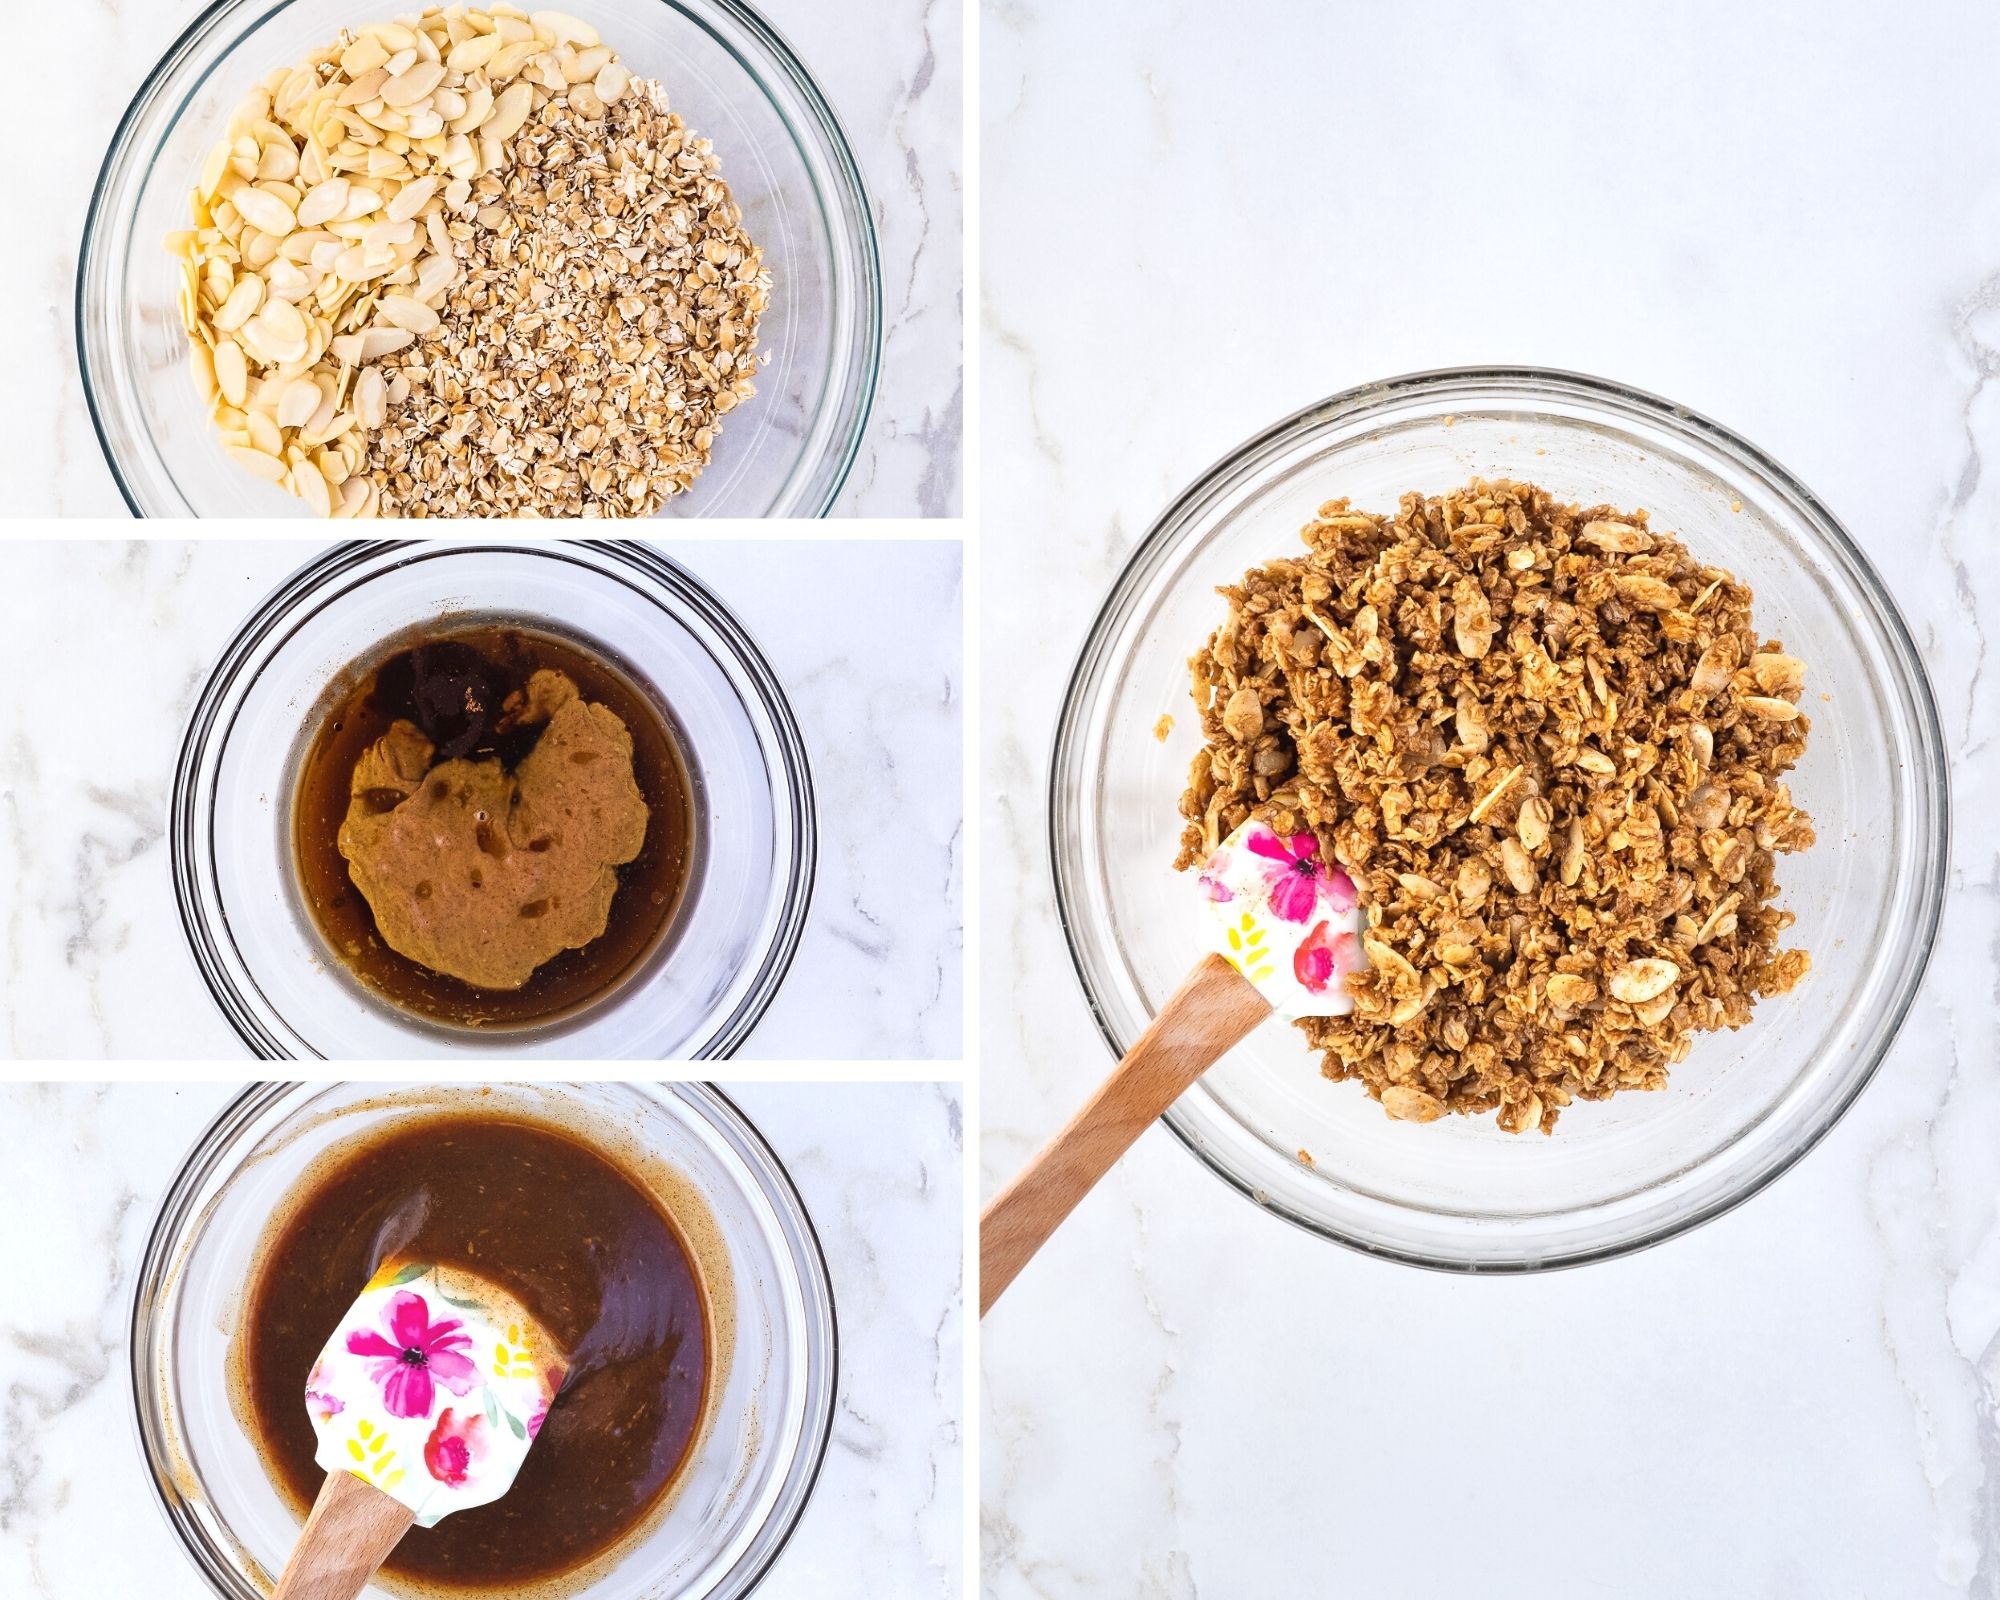 Step by step images of how to make granola.